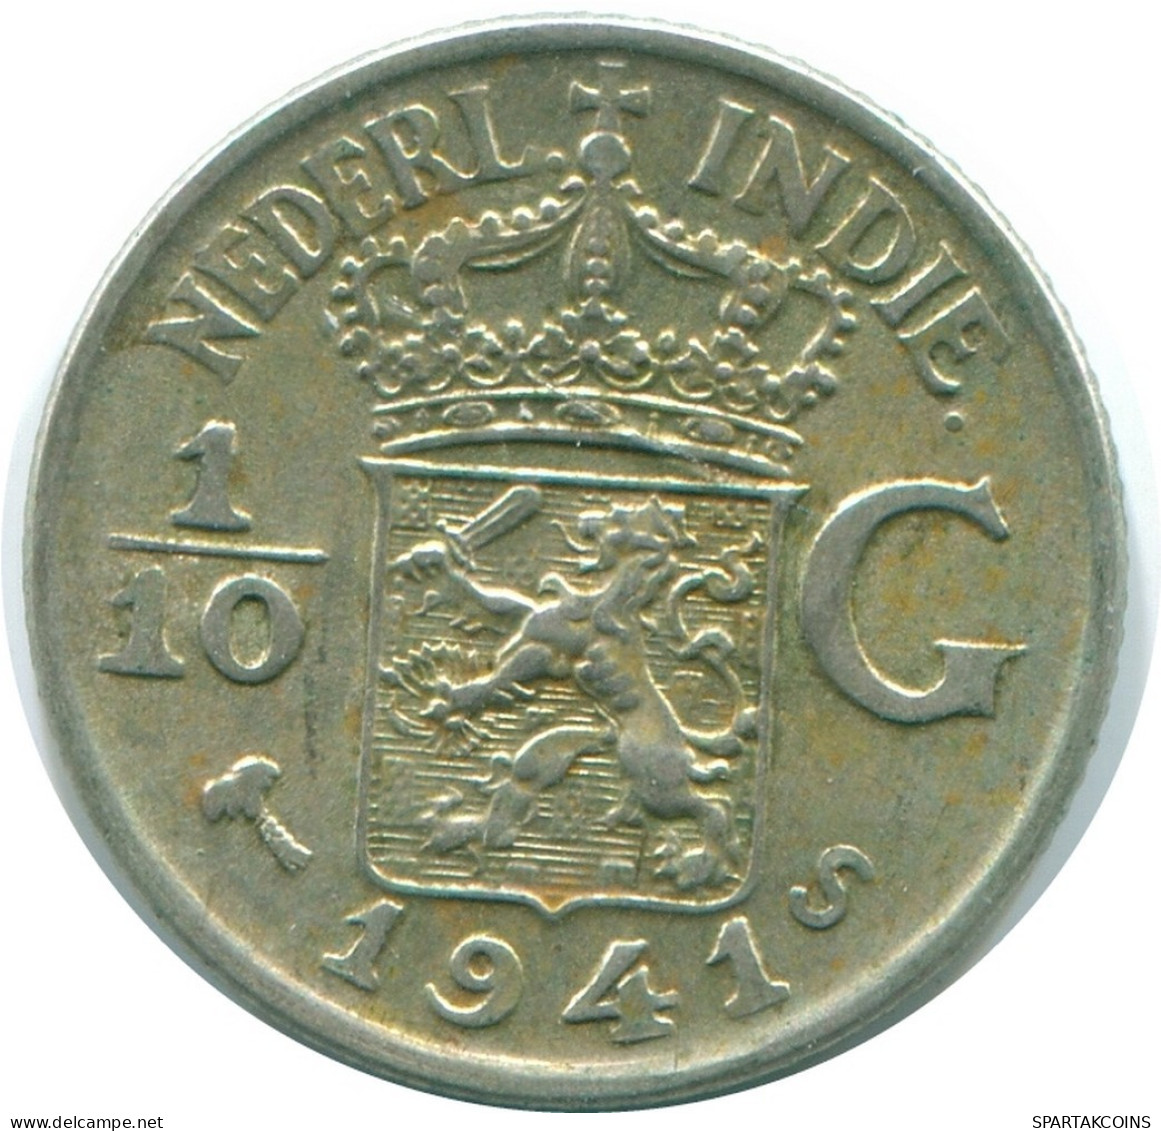 1/10 GULDEN 1941 S NETHERLANDS EAST INDIES SILVER Colonial Coin #NL13682.3.U.A - Indie Olandesi